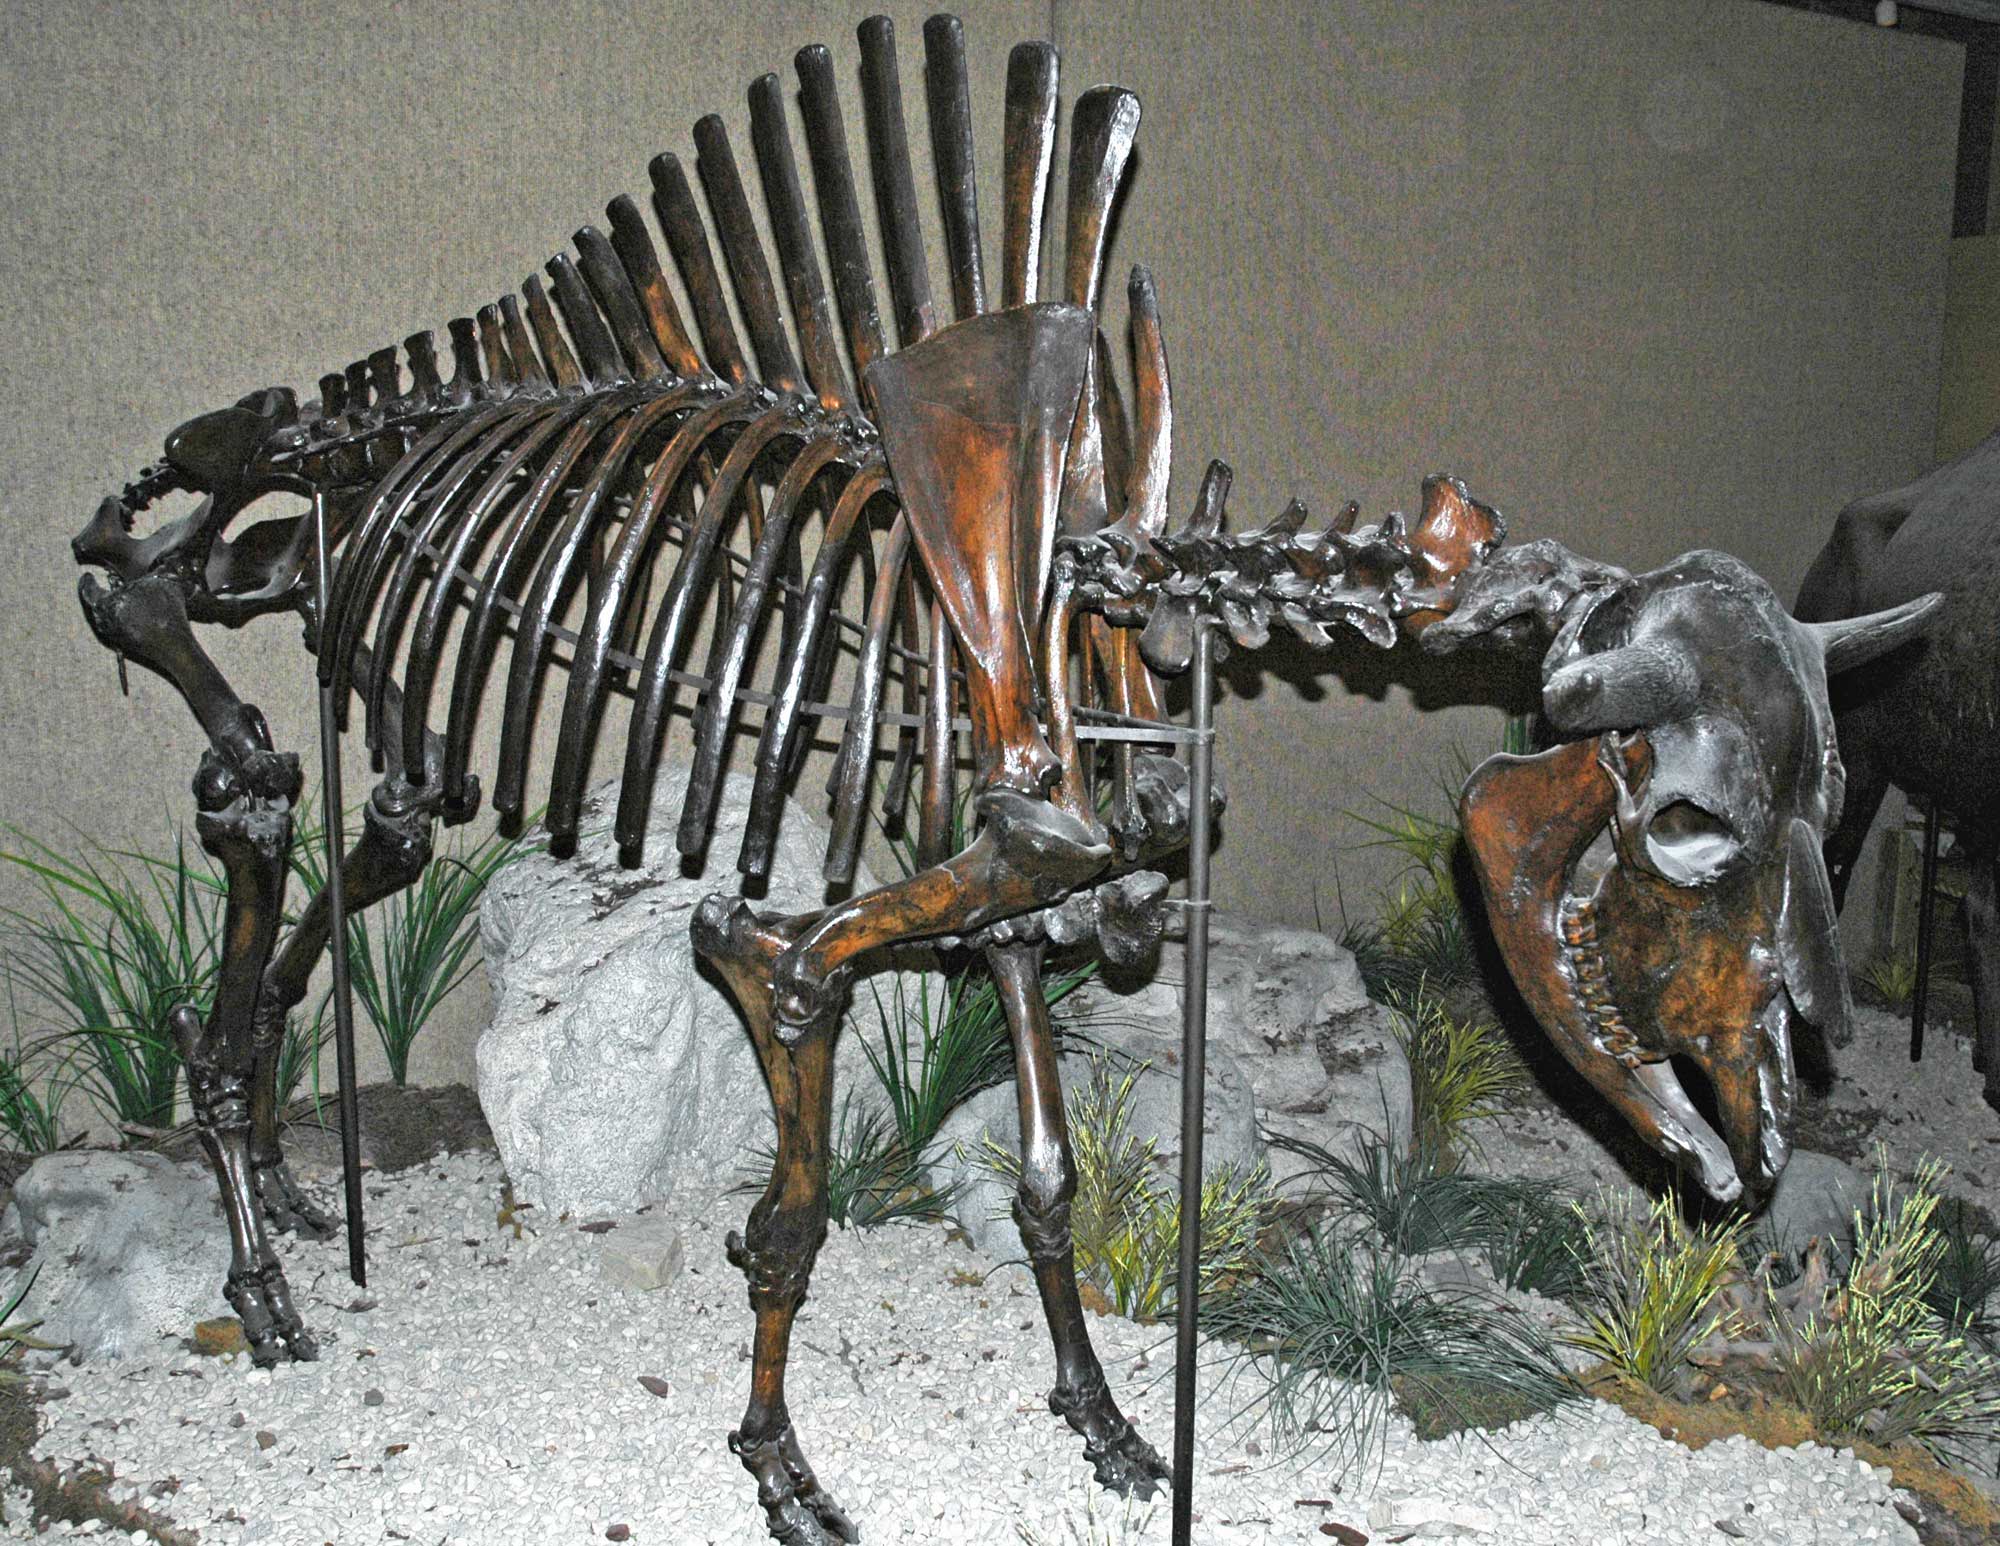 Photograph of the skeleton of an extinct Pleistocene bison on display in a museum. The skeleton was collected from near Folsom, New Mexico.